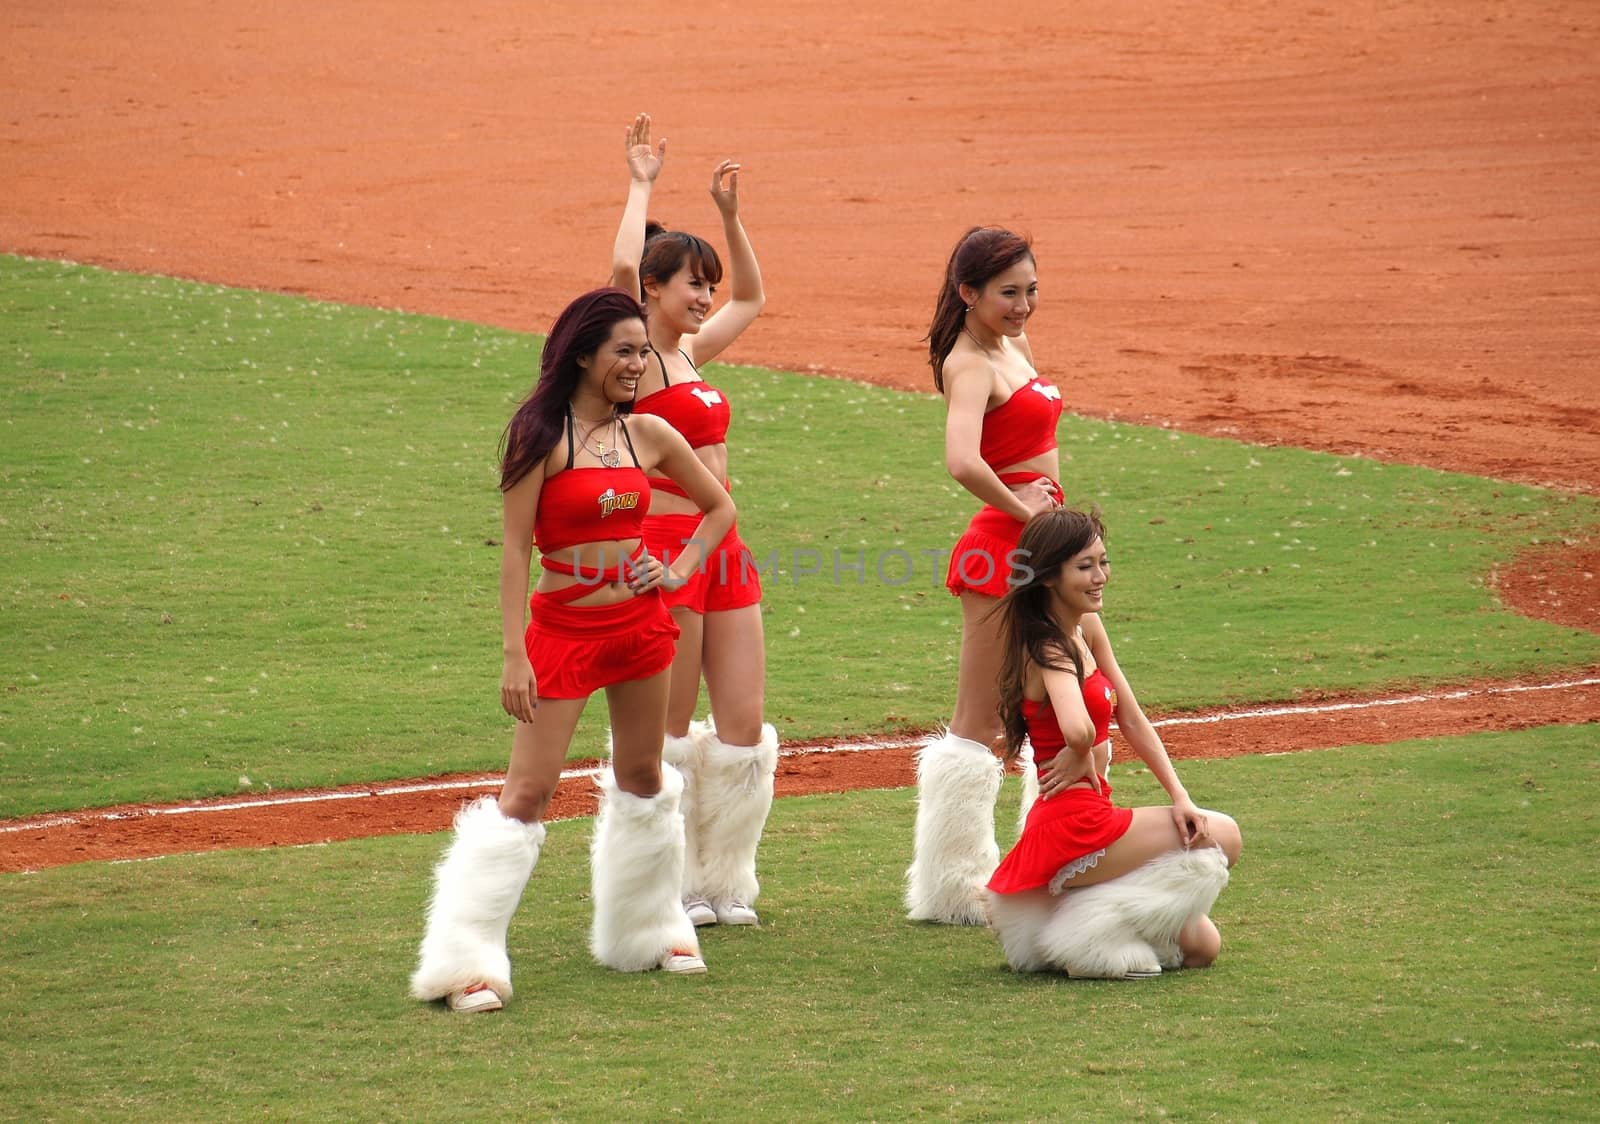 PINGTUNG, TAIWAN, APRIL 8: Cheerleaders encourage the fans of  the President Lions who face the Lamigo Monkeys in a Pro Baseball League game. The Lions won 2:0 on April 8, 2012 in Pingtung. 
